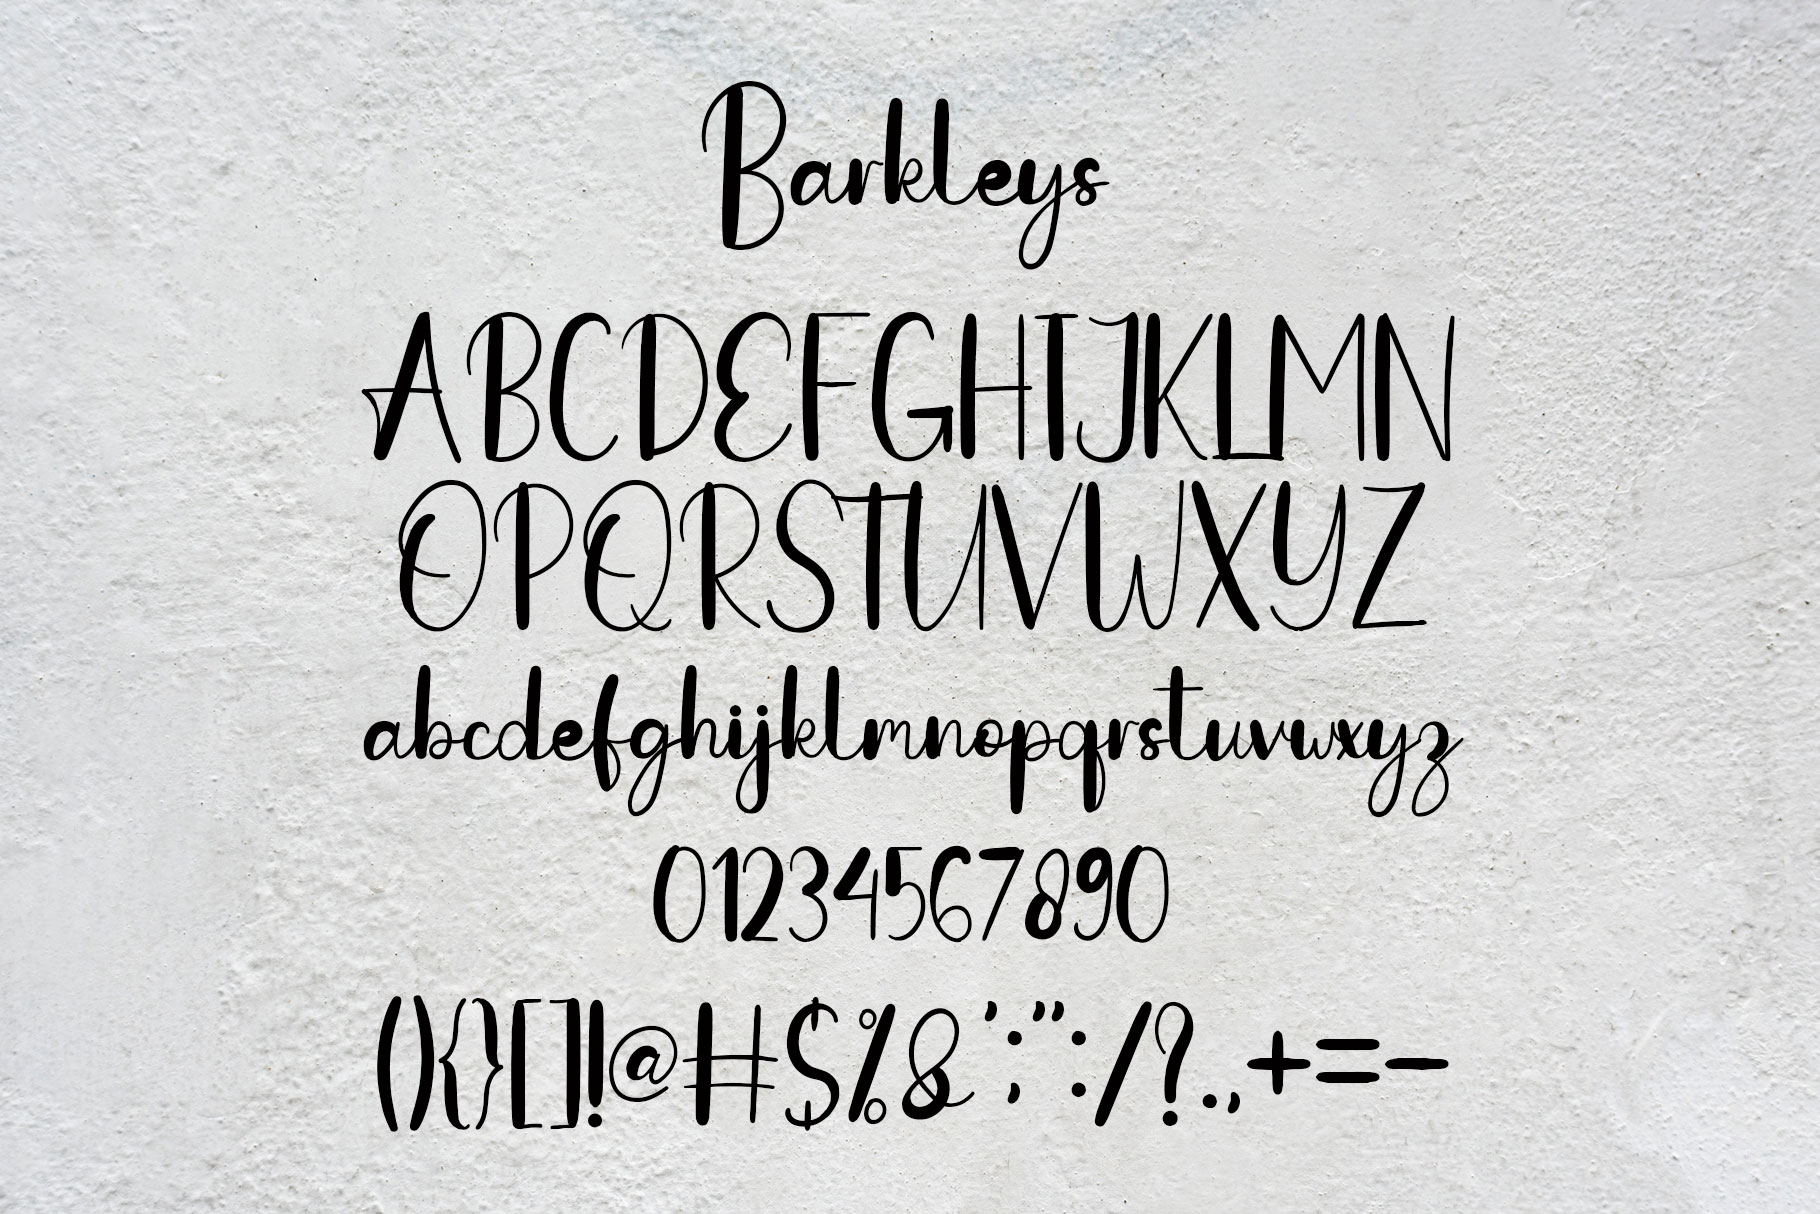 Image with symbols and letters of colorful font Barkleys